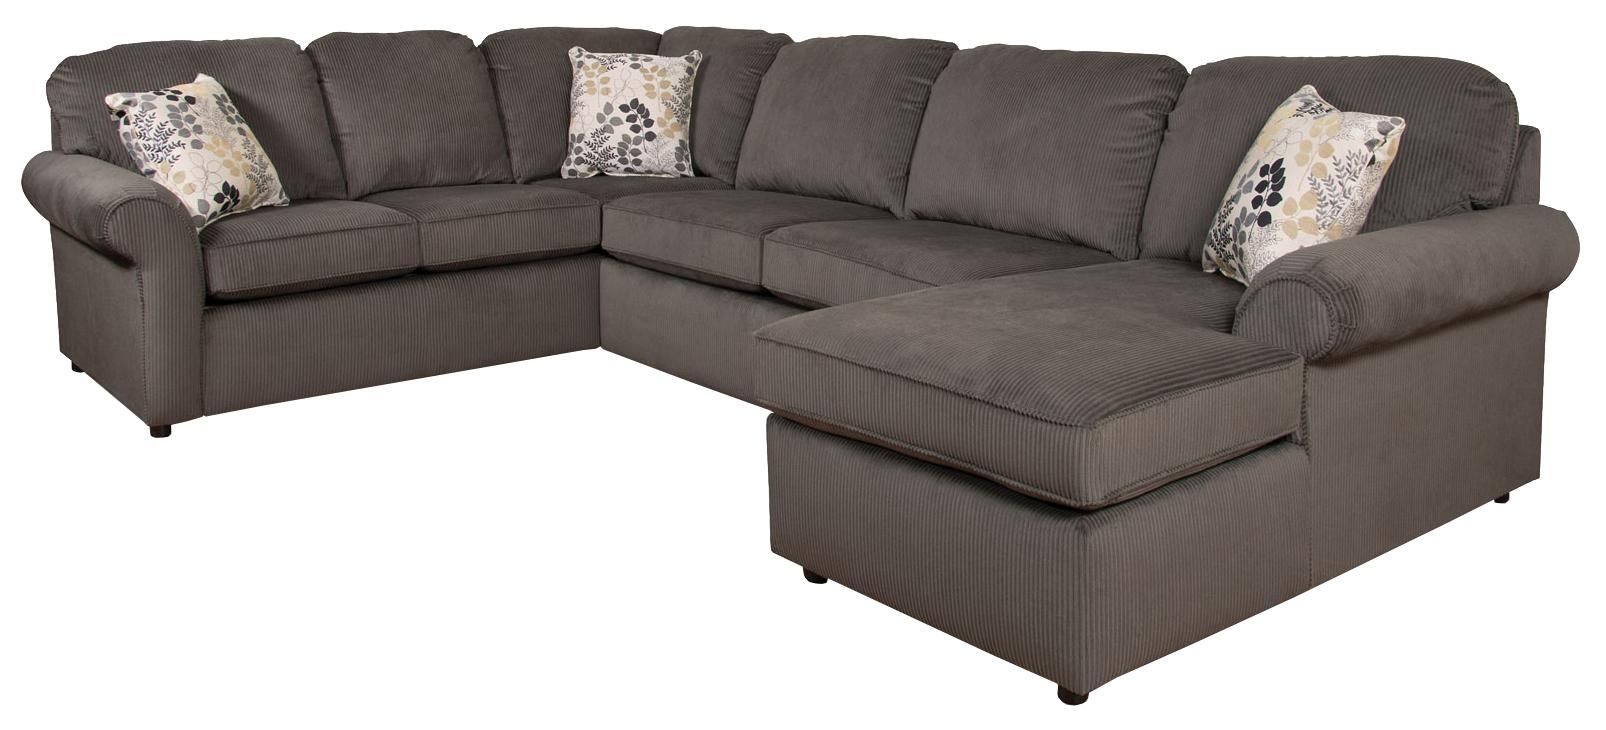 England Malibu 5 6 Seat (right Side) Chaise Sectional Sofa | Dunk Regarding England Sectional Sofas (View 4 of 10)